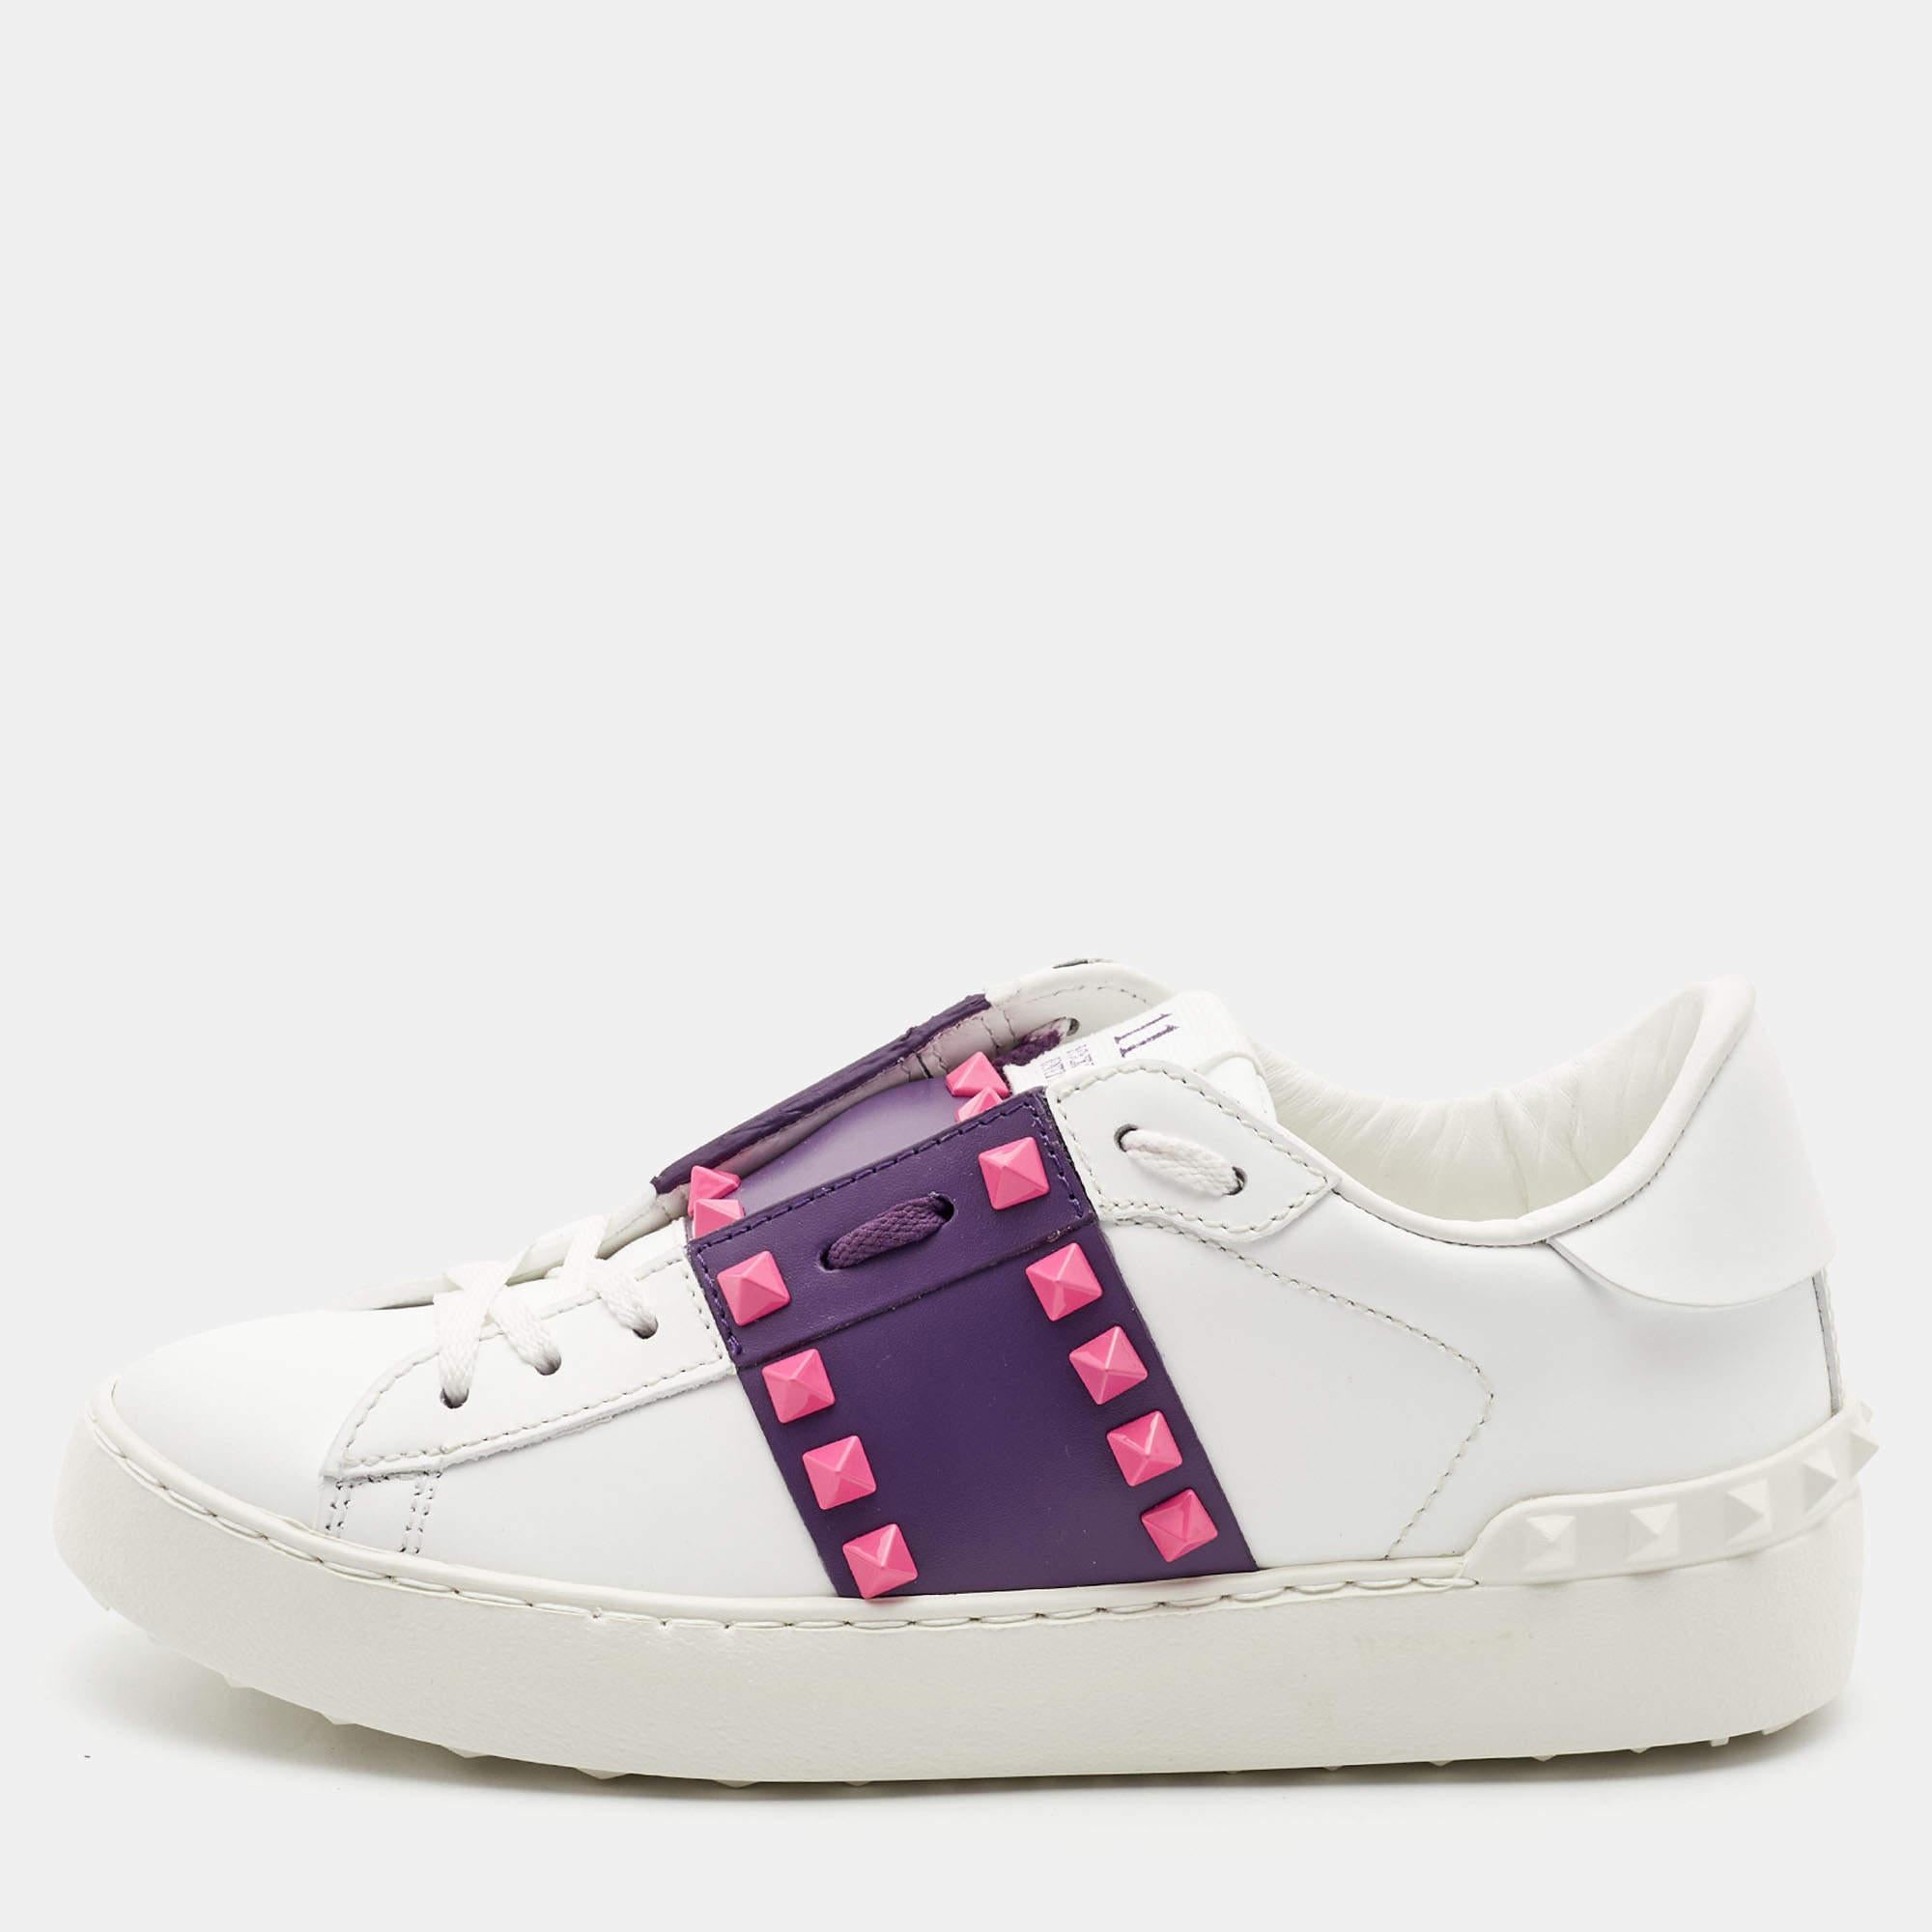 Valentino White/Purple Leather Rockstud Low Top Sneakers Size 35.5 3